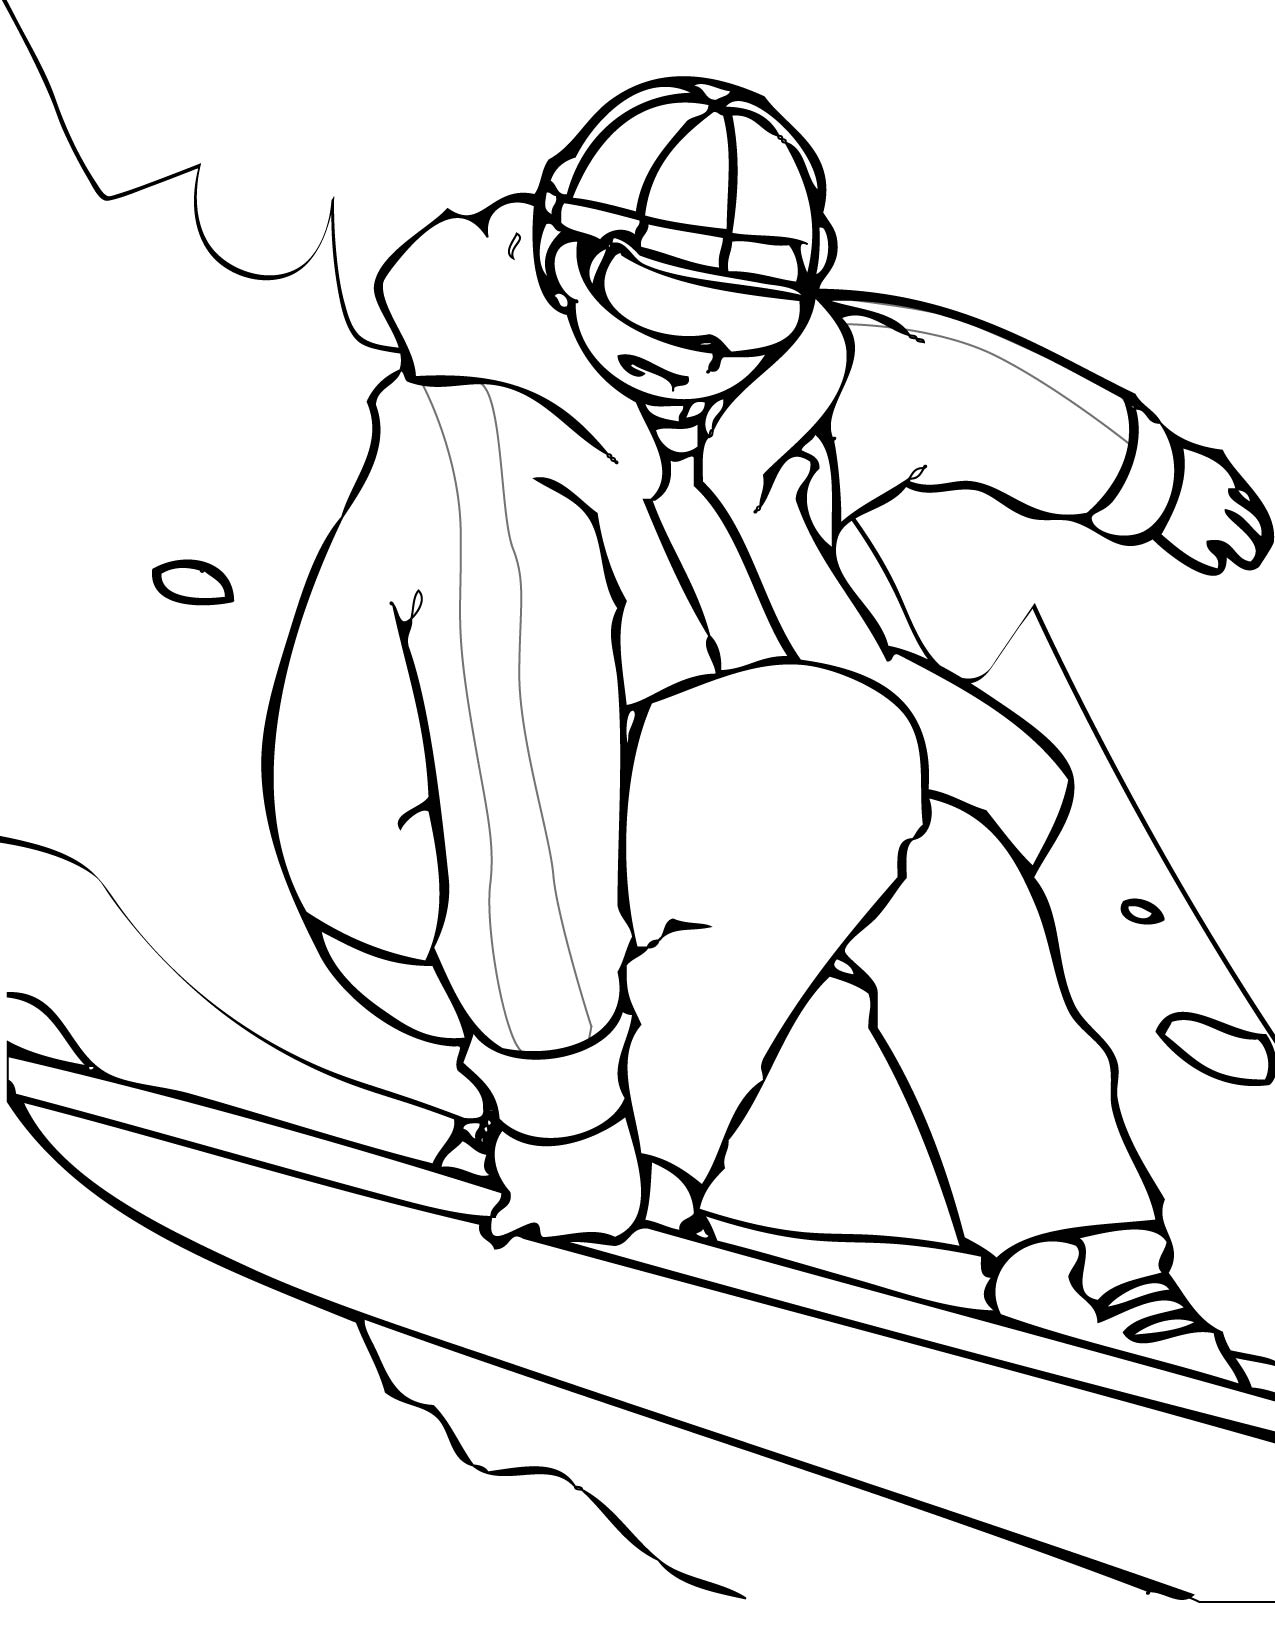 Snowboarding Coloring Pages for childrens printable for free